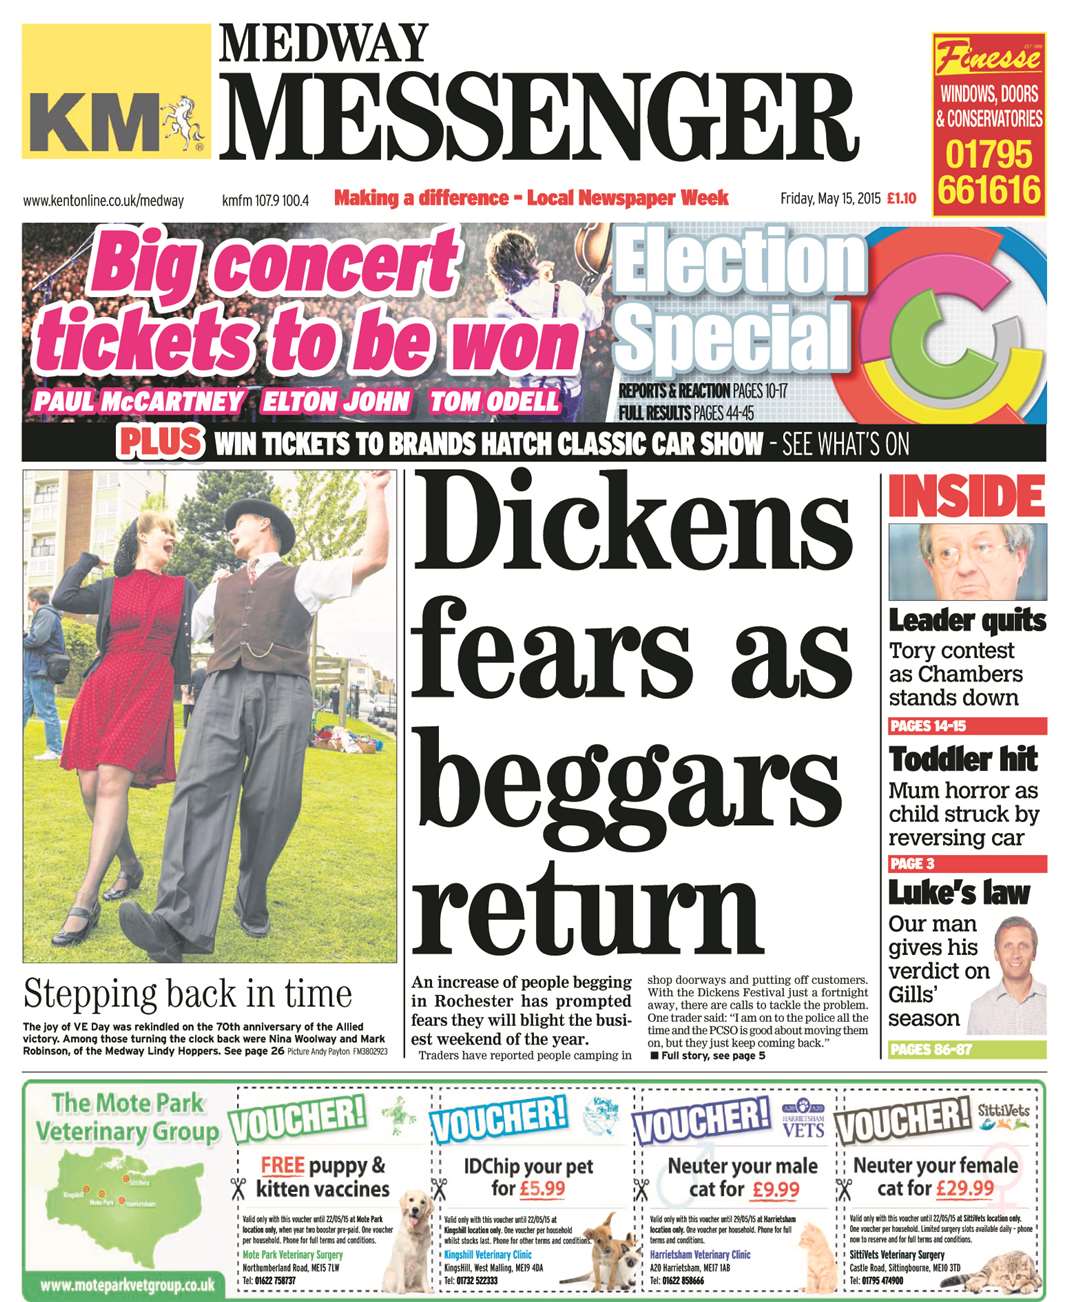 Front page of the Medway Messenger earlier this month